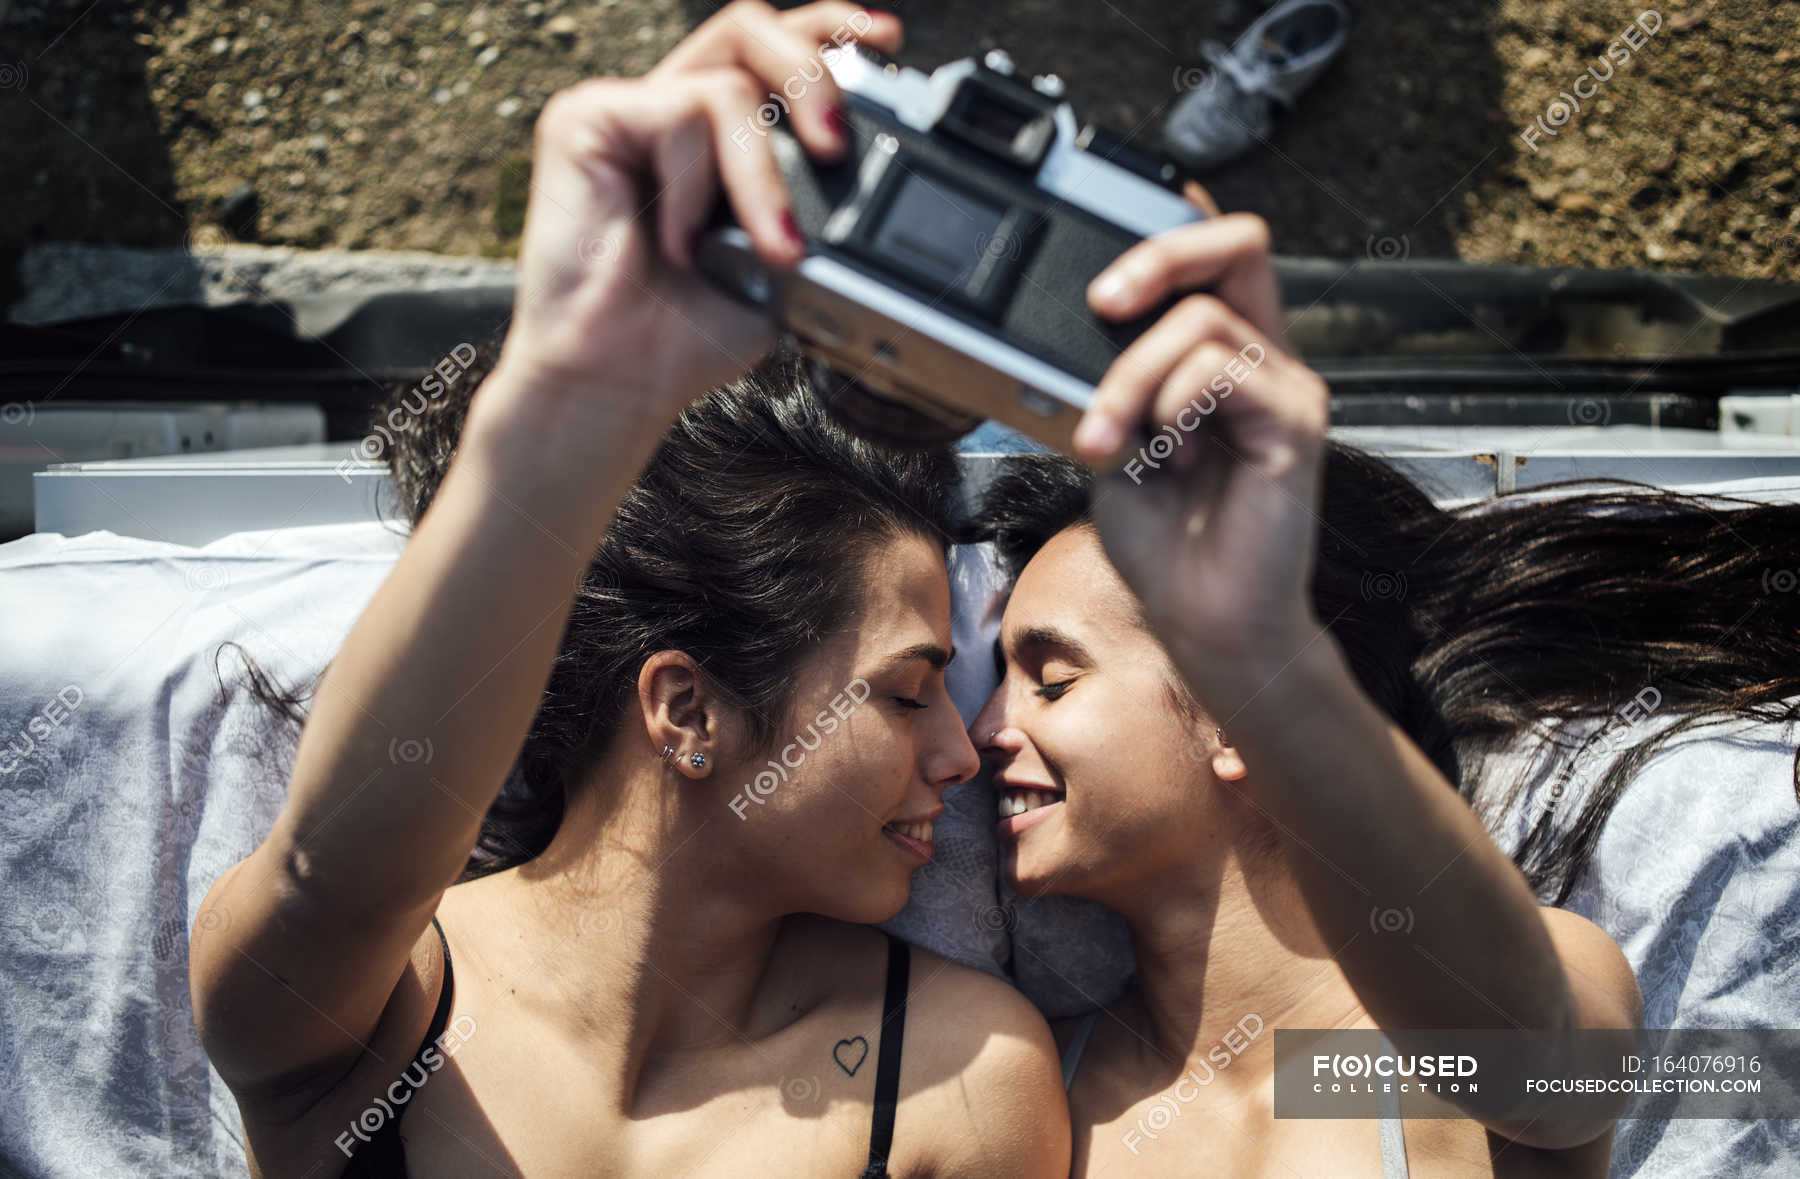 ignore Suppose Misunderstanding Lesbian couple wearing lingerie — partners, people - Stock Photo |  #164076916